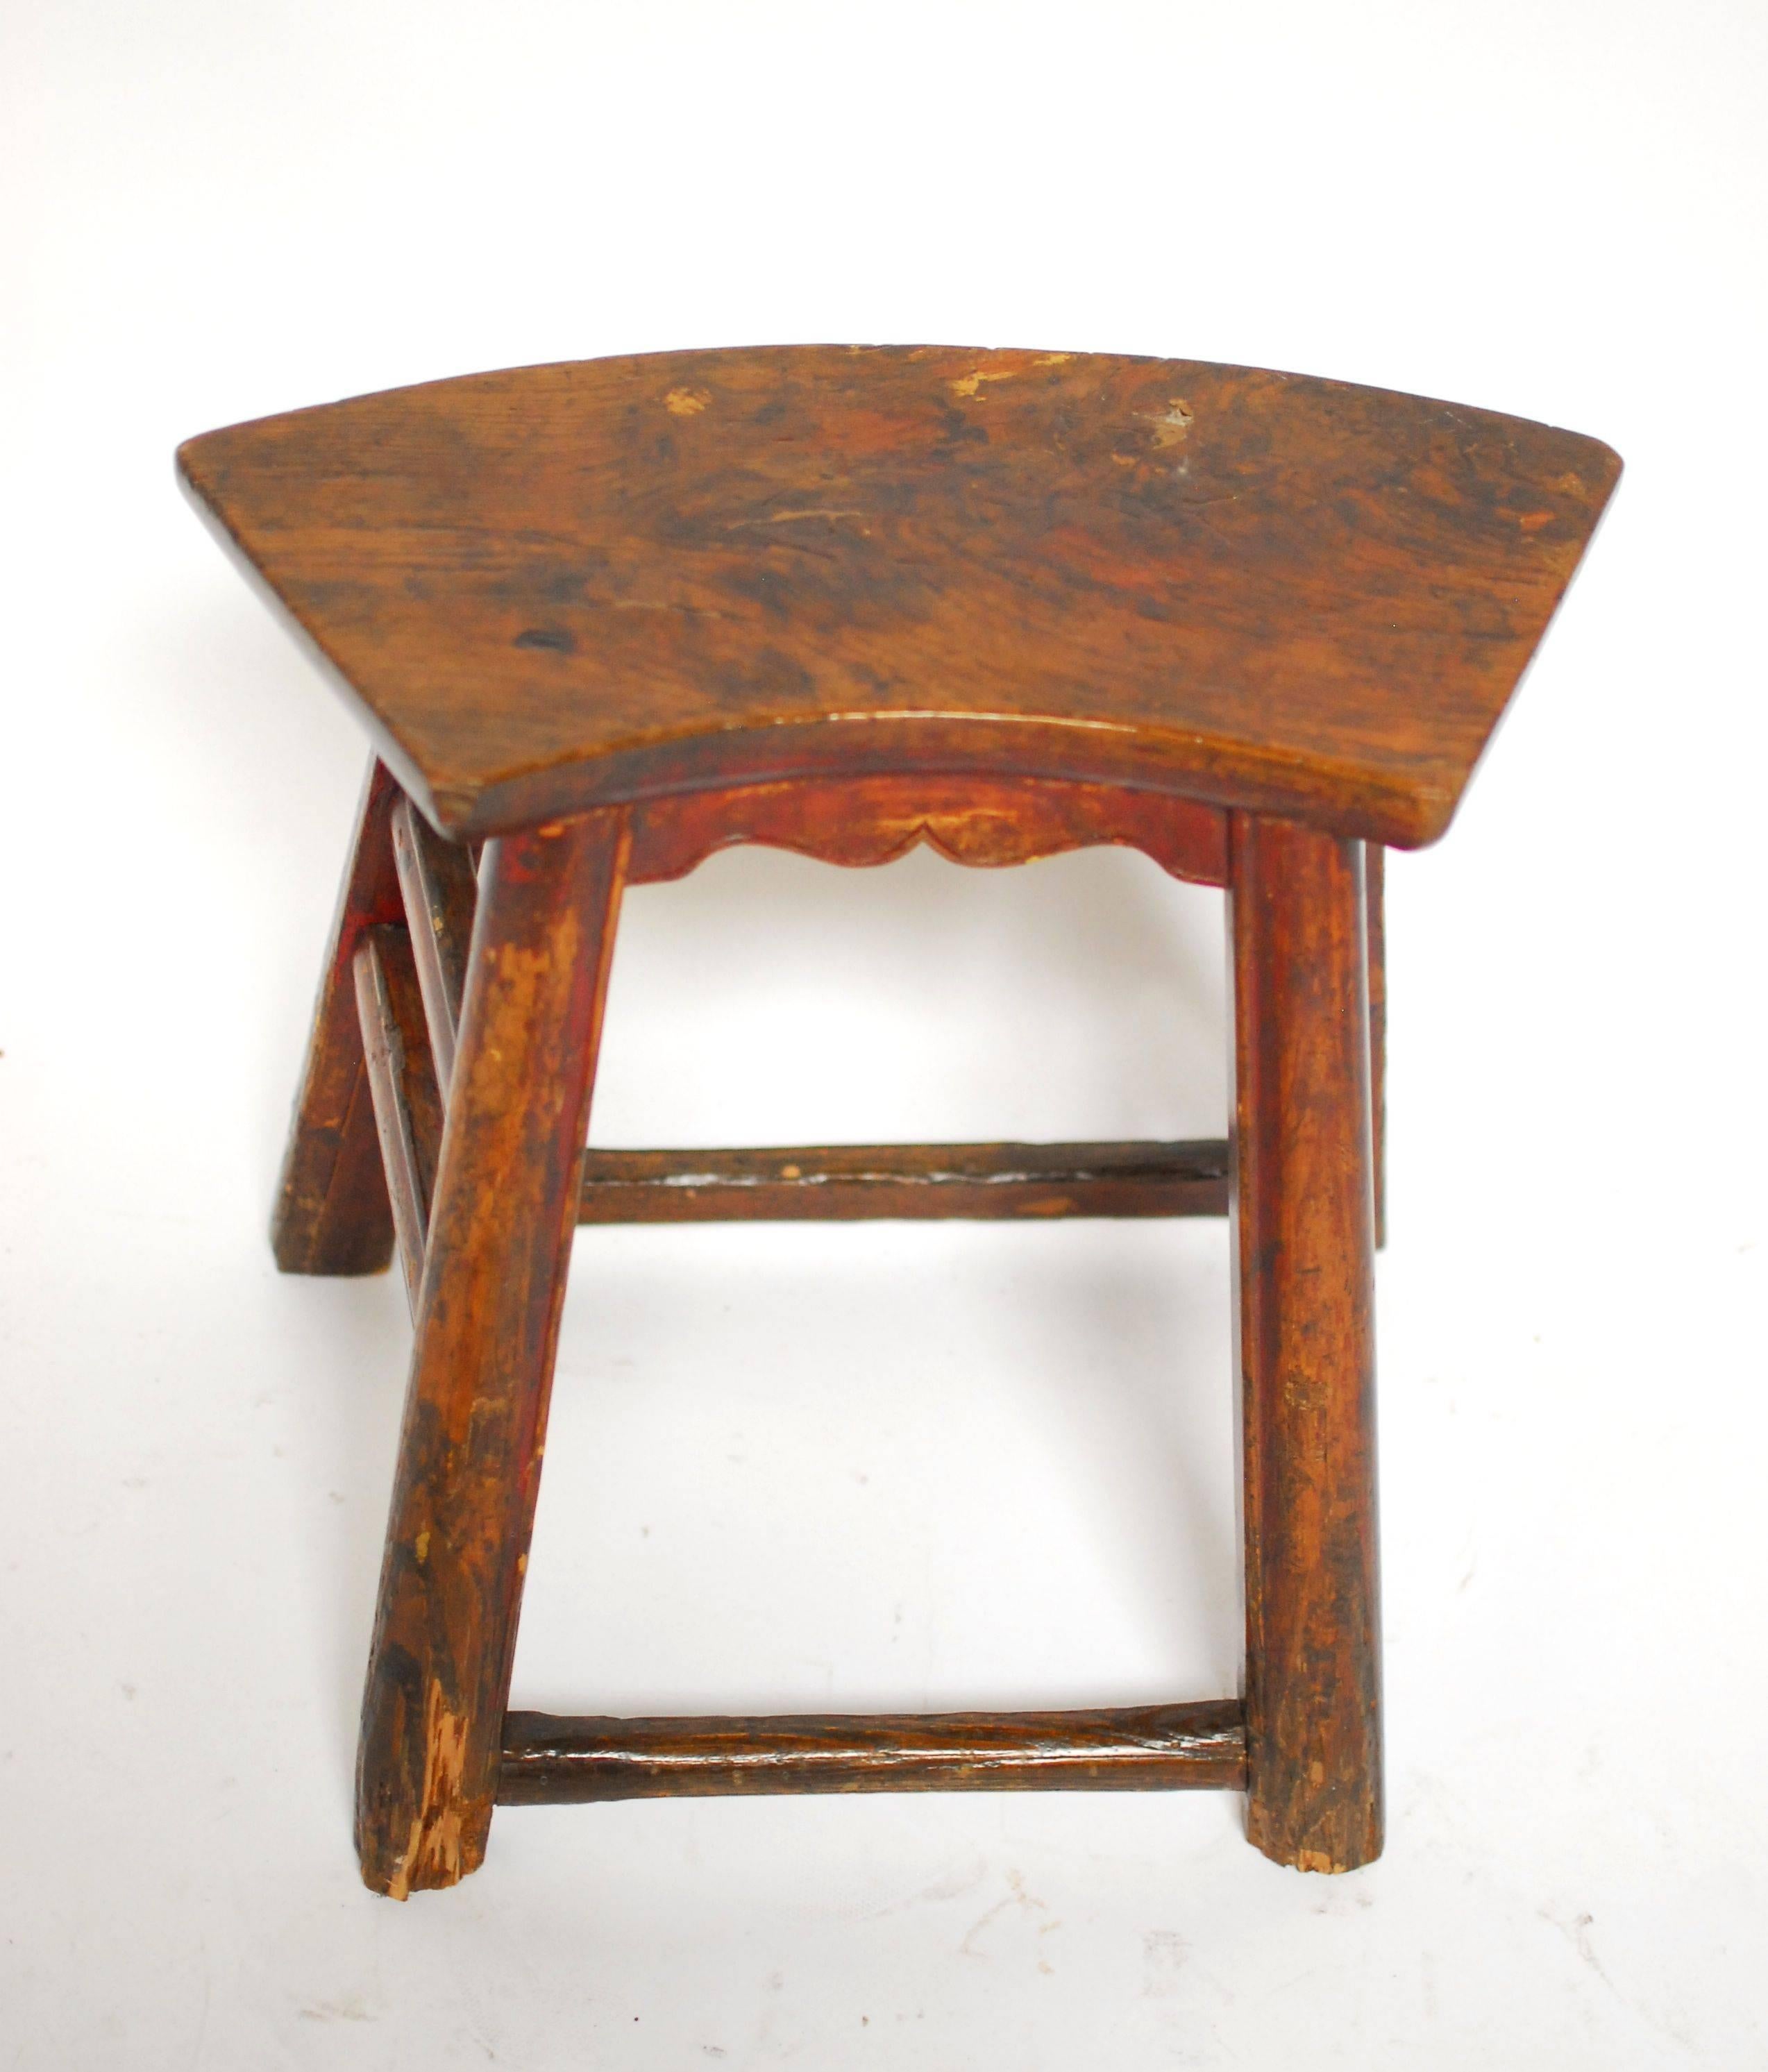 Chinese carved wooden stool with a fan shaped seat. Features splayed legs with stretchers on each side and a carved apron on the front. Constructed with old world mortise and tenon joinery and bead edge detail on the legs and side stretchers.
